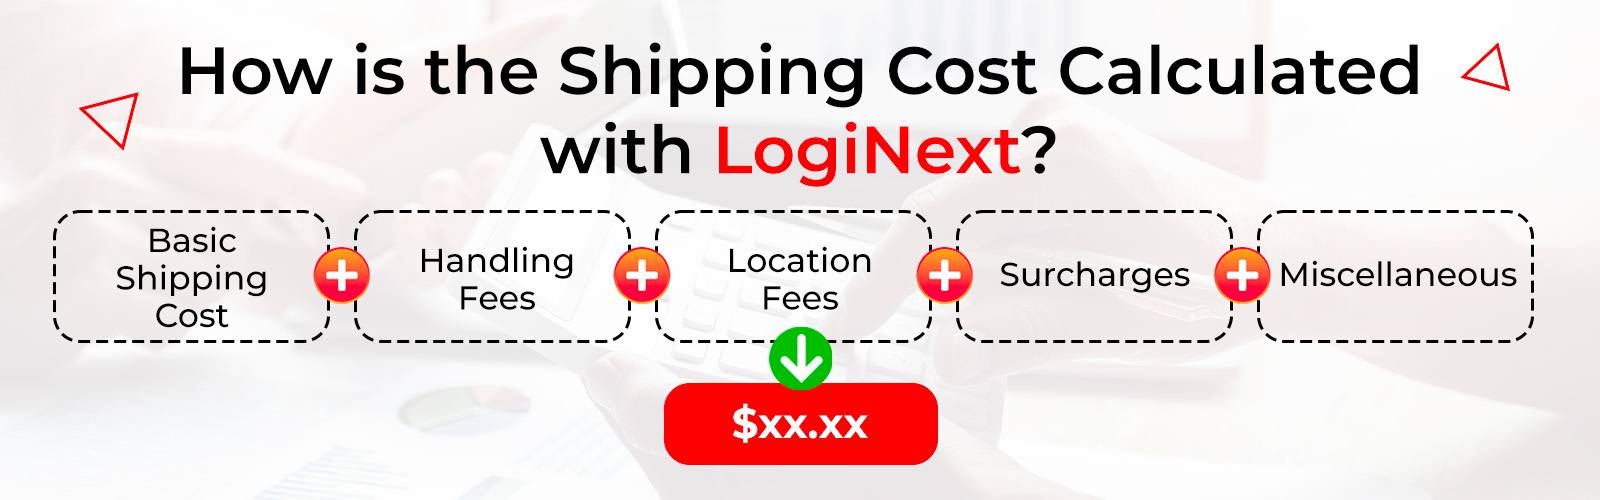 Shipping cost estimate at LogiNext